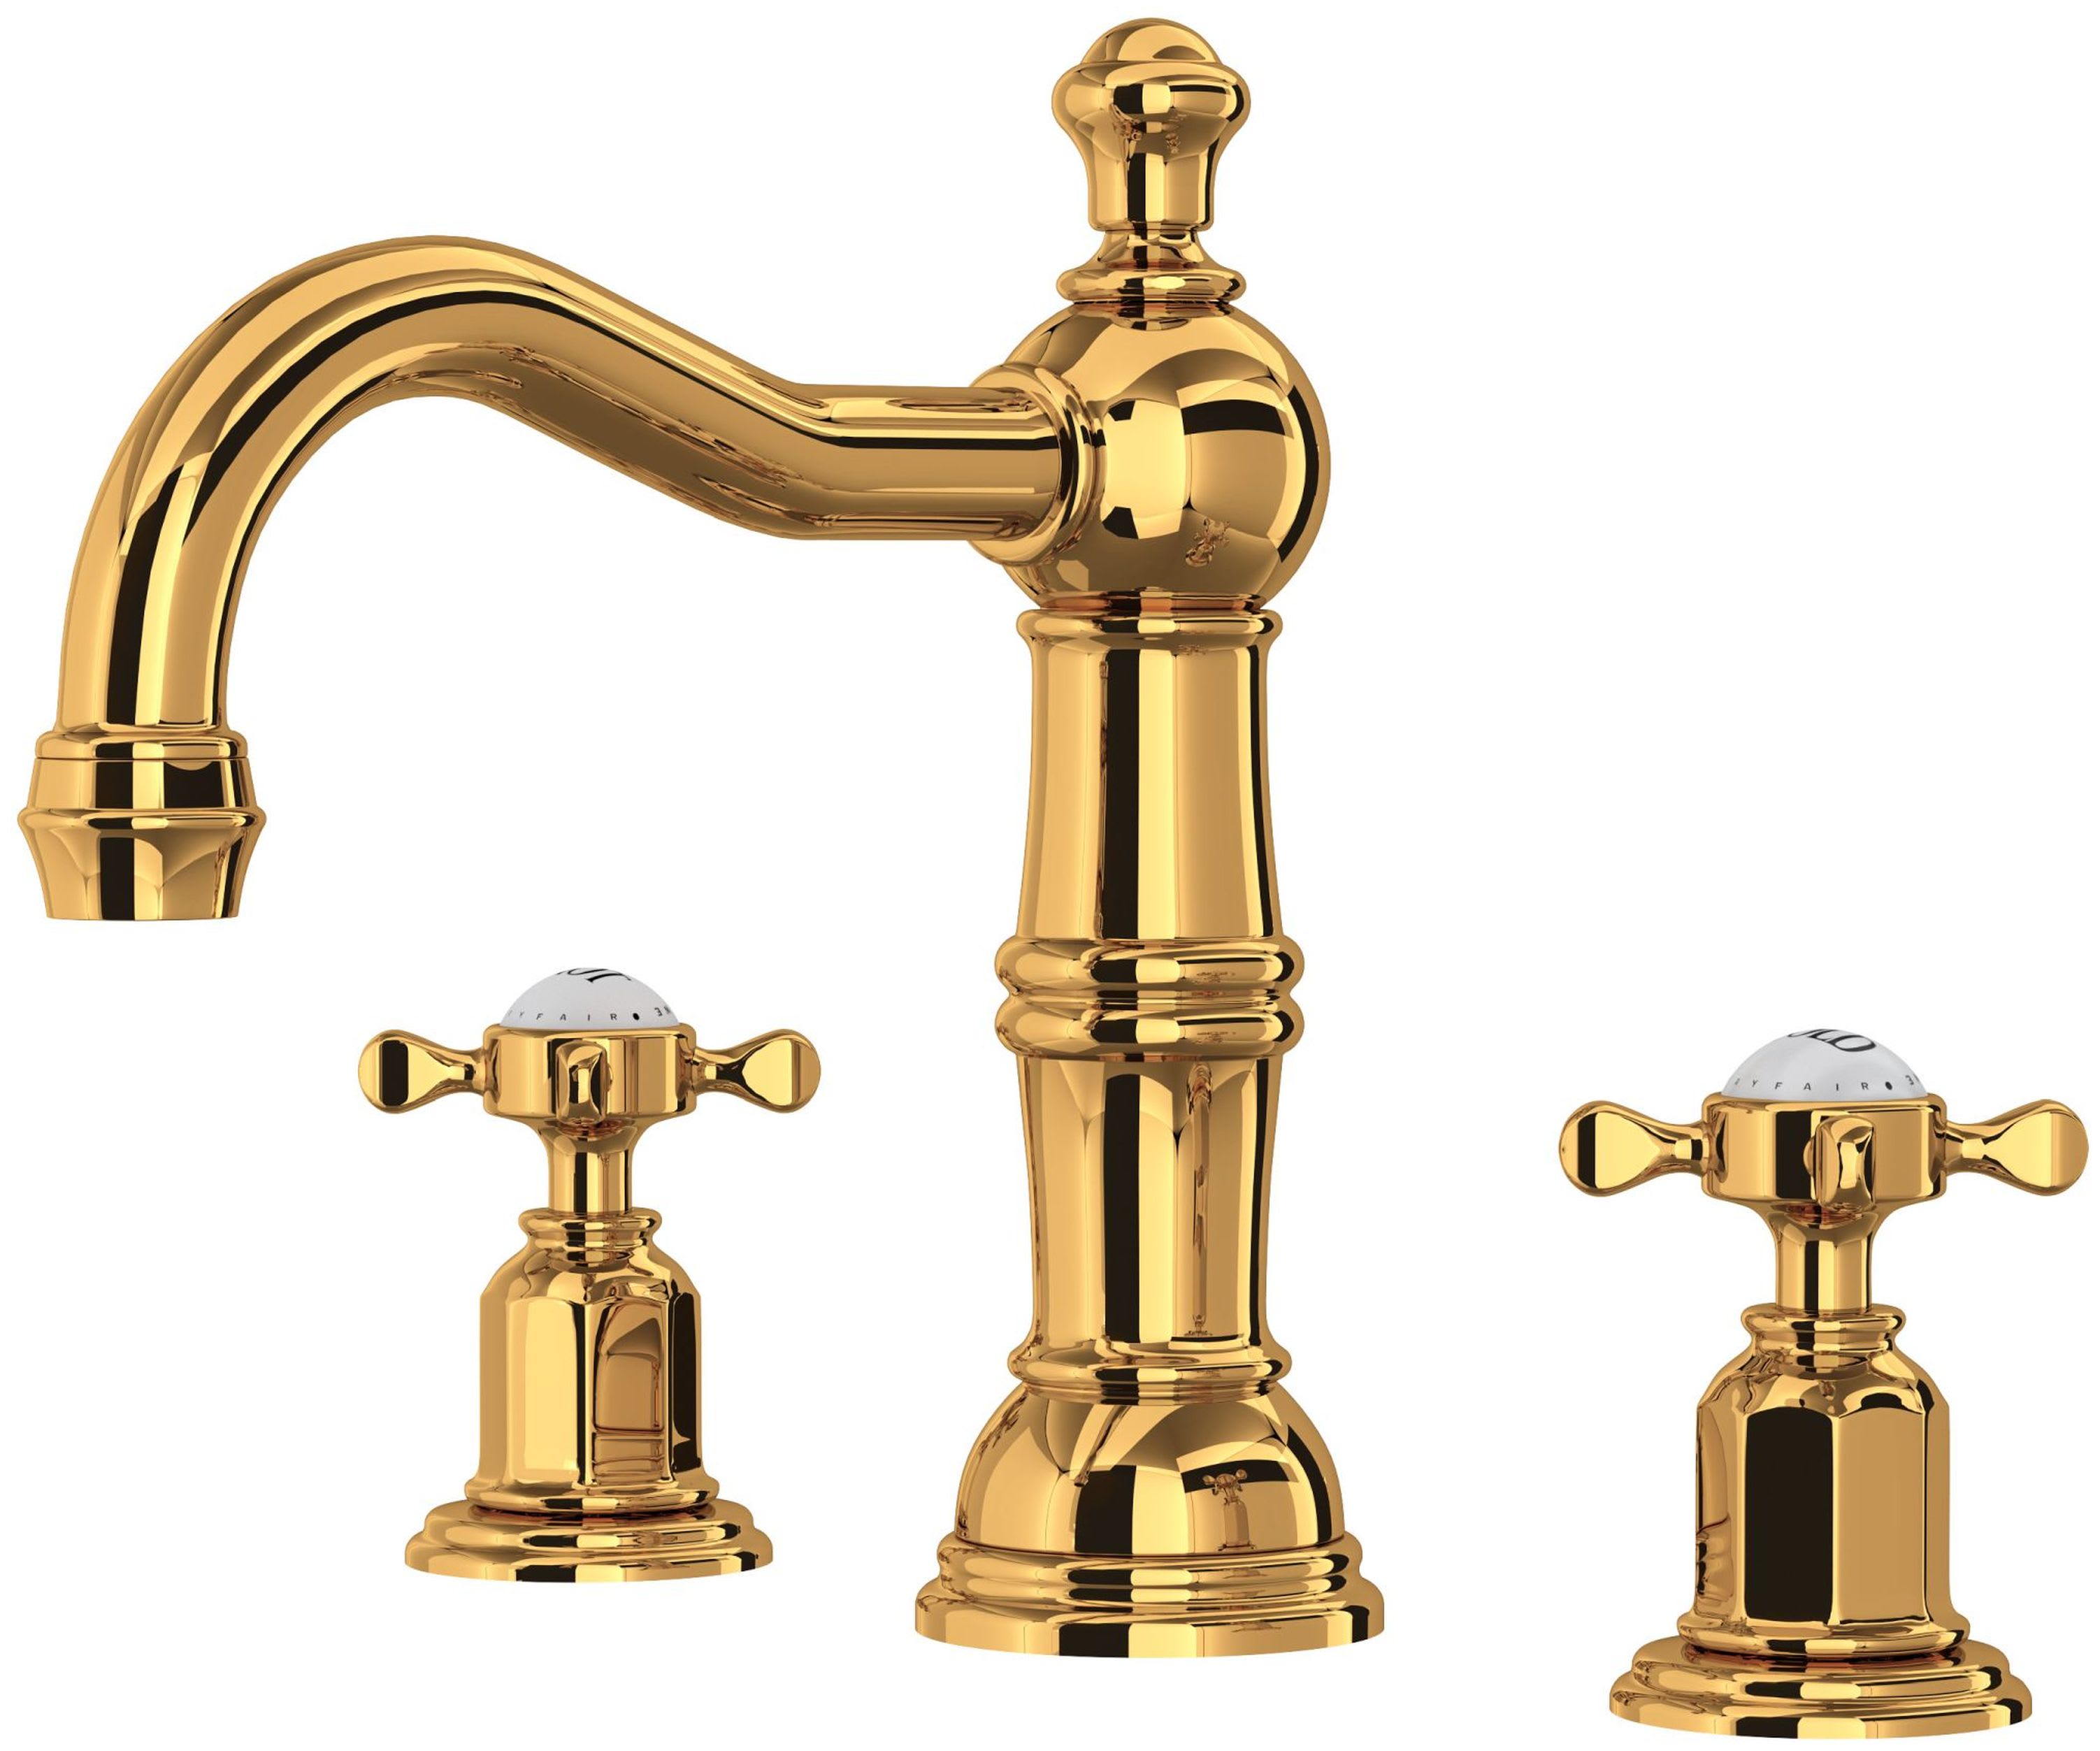 Perrin & Rowe Edwardian Single Hole Single Handle Bathroom Faucet -  Unlacquered Brass with Metal Lever Handle